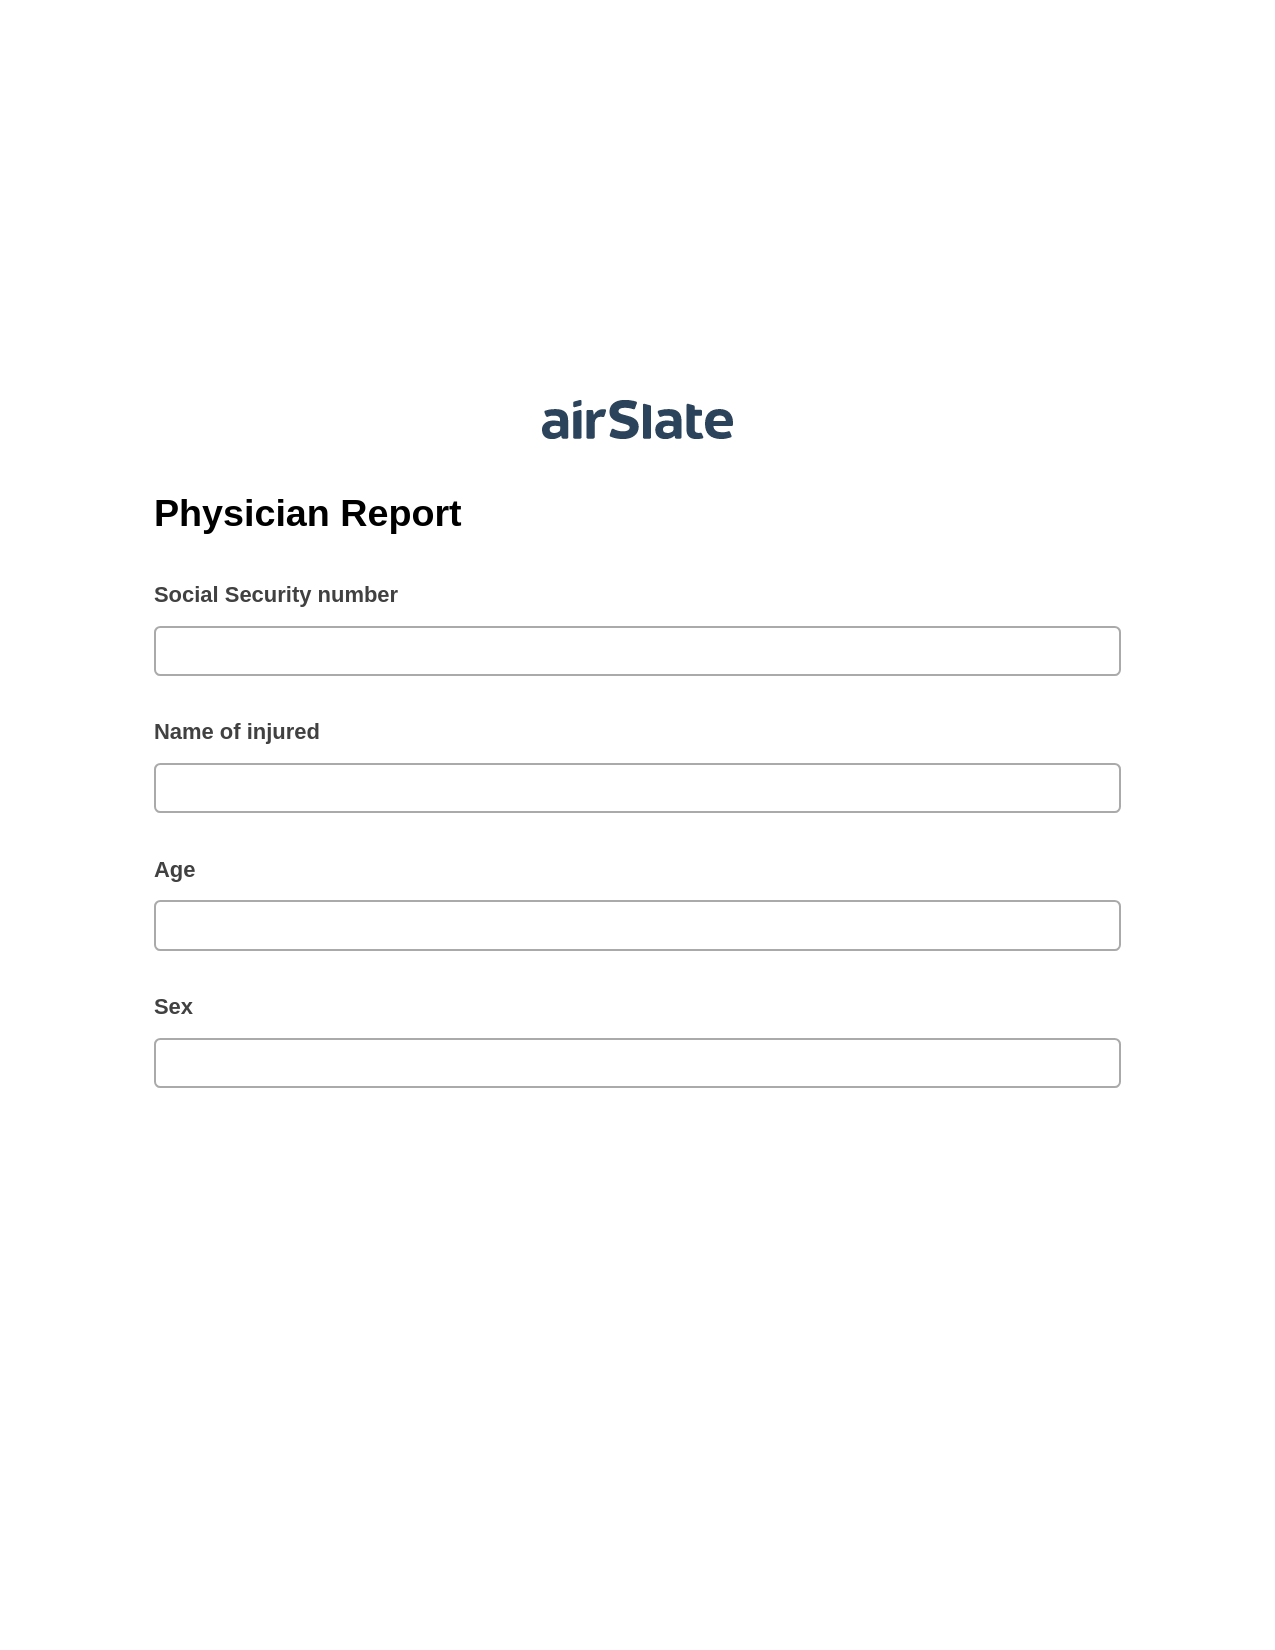 Physician Report Pre-fill from CSV File Bot, Update NetSuite Record Bot, Export to NetSuite Bot